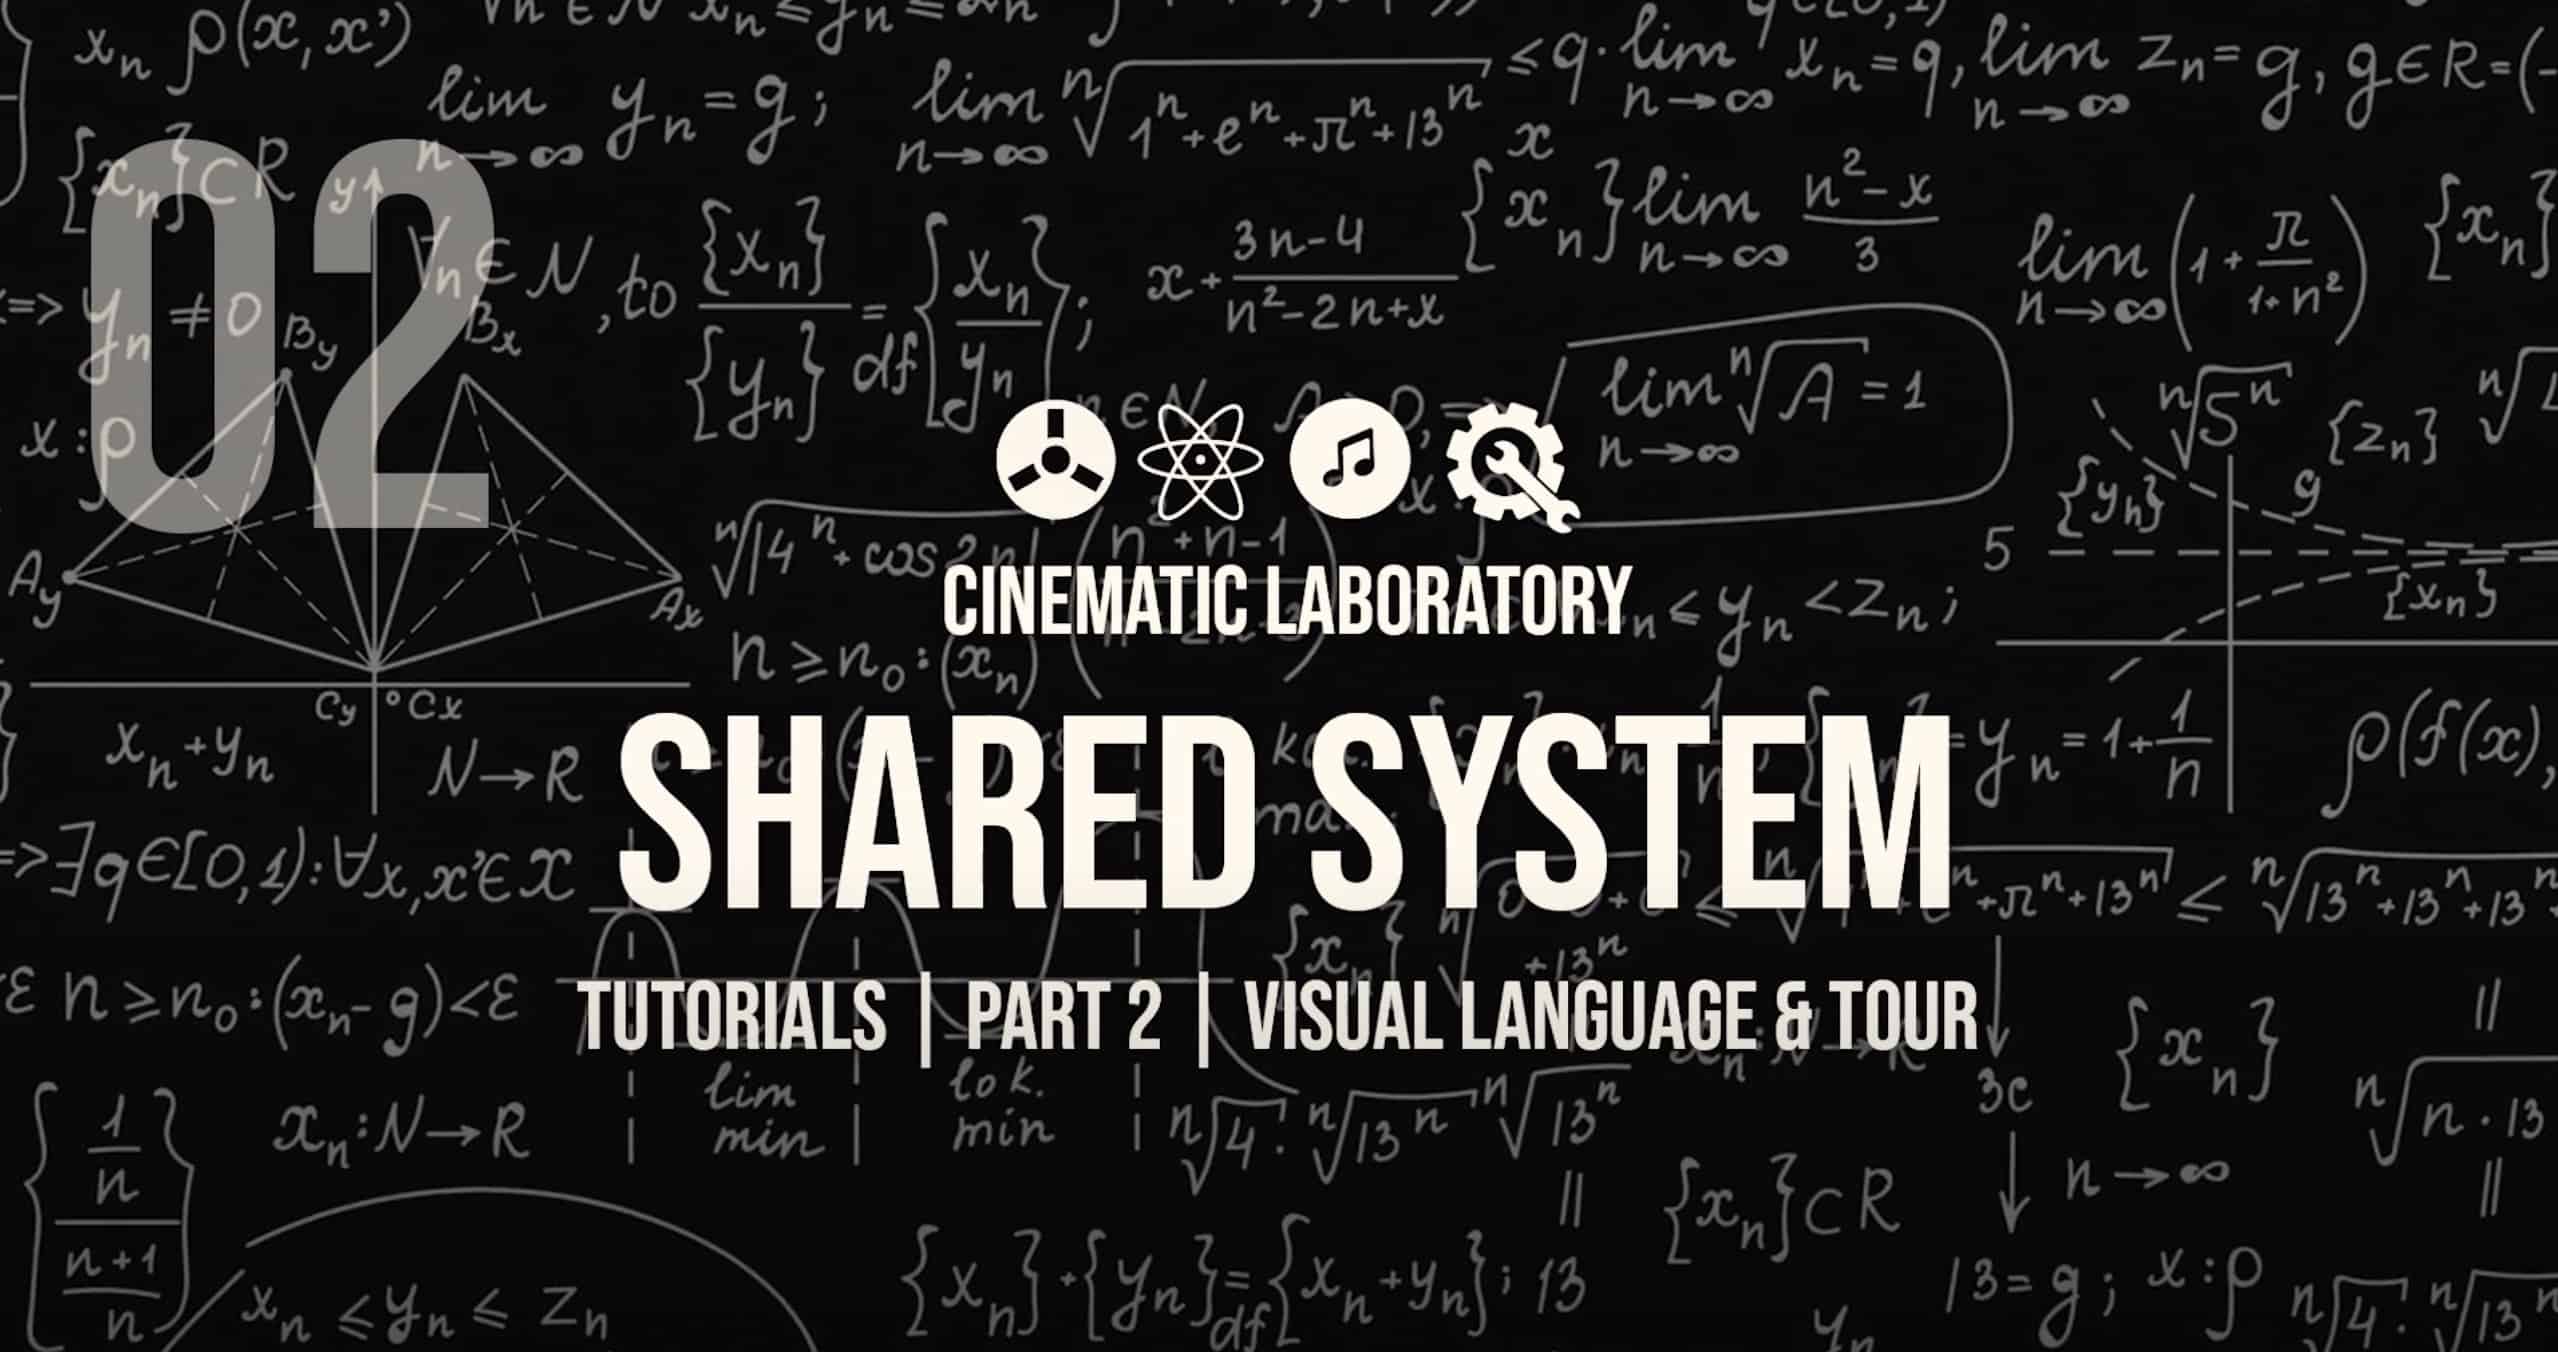 Shared System Tutorials Part 2 Visual language and tour